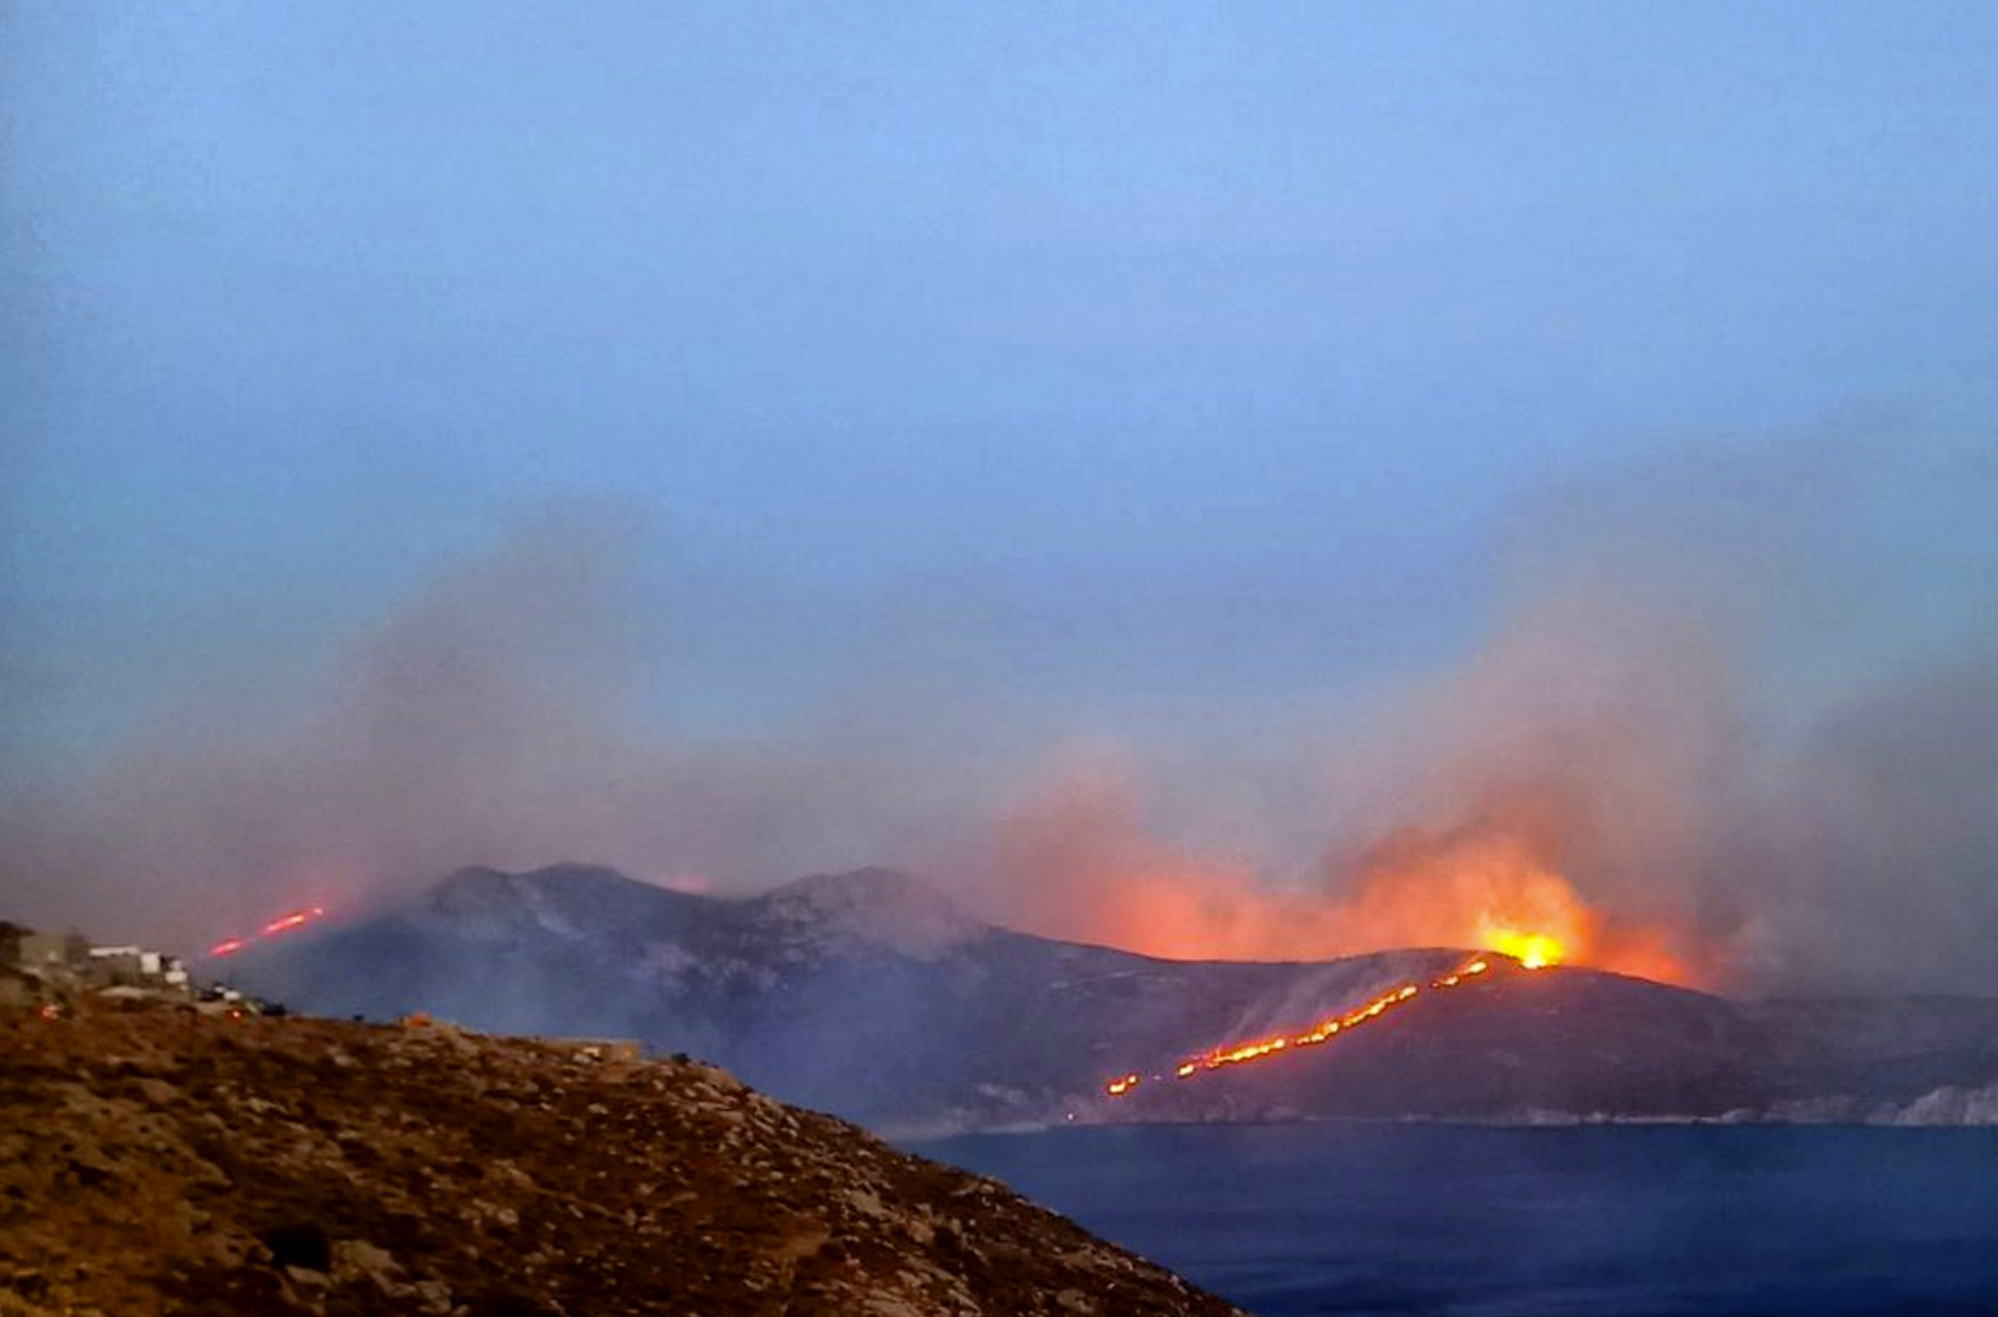 Wildfire Raging Out of Control on Serifos Island